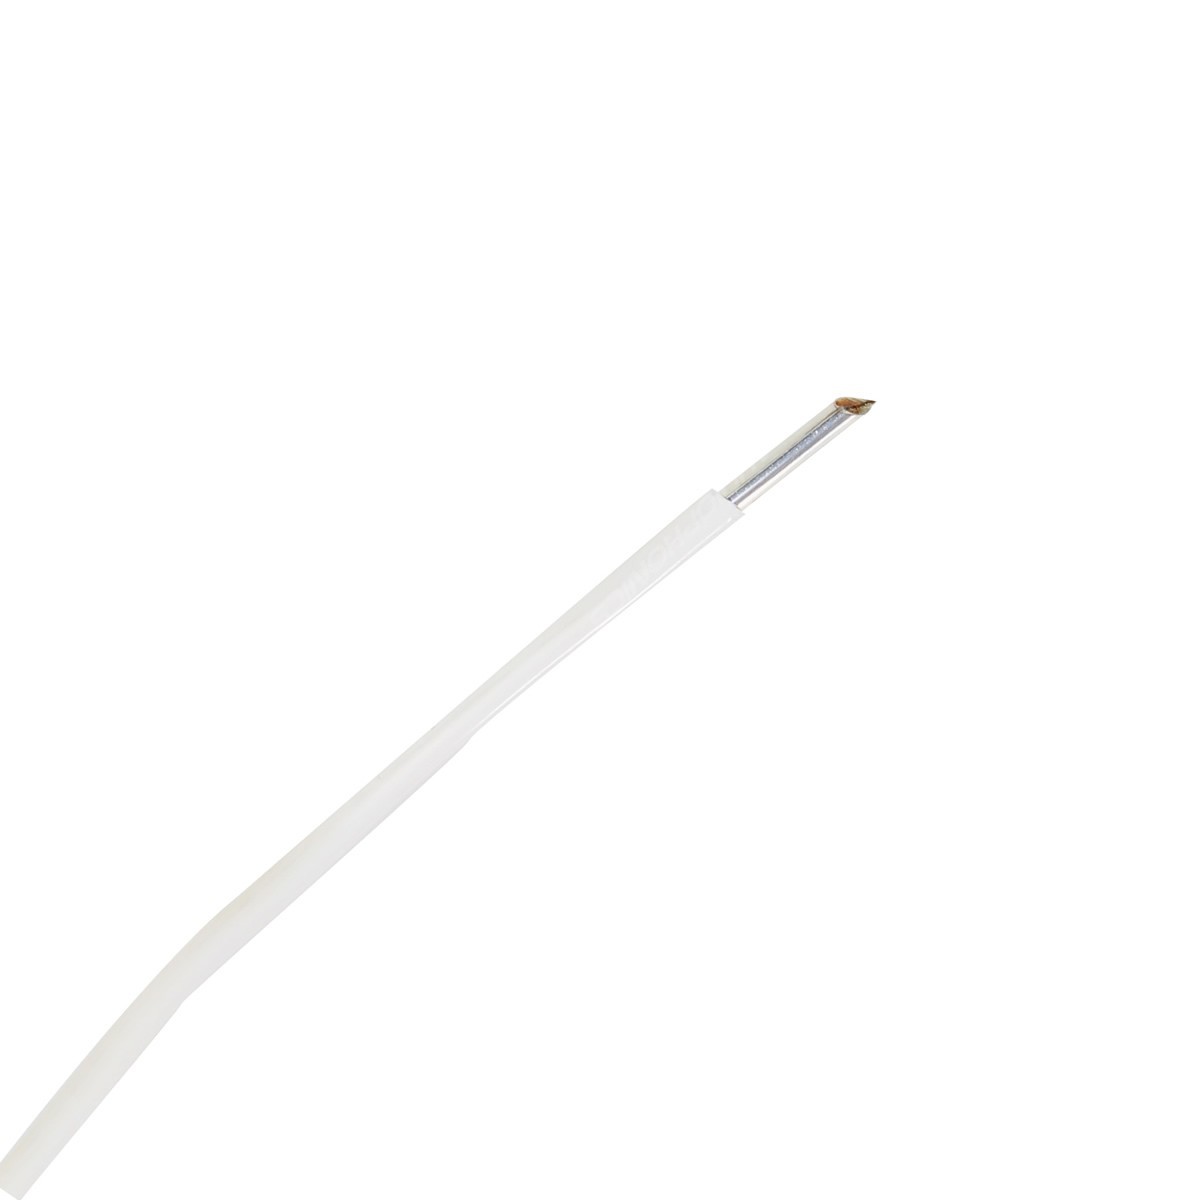 OFC Pur Copper High Purity/Silver Plated PTFE Ø 1.3mm² - Audiophonics